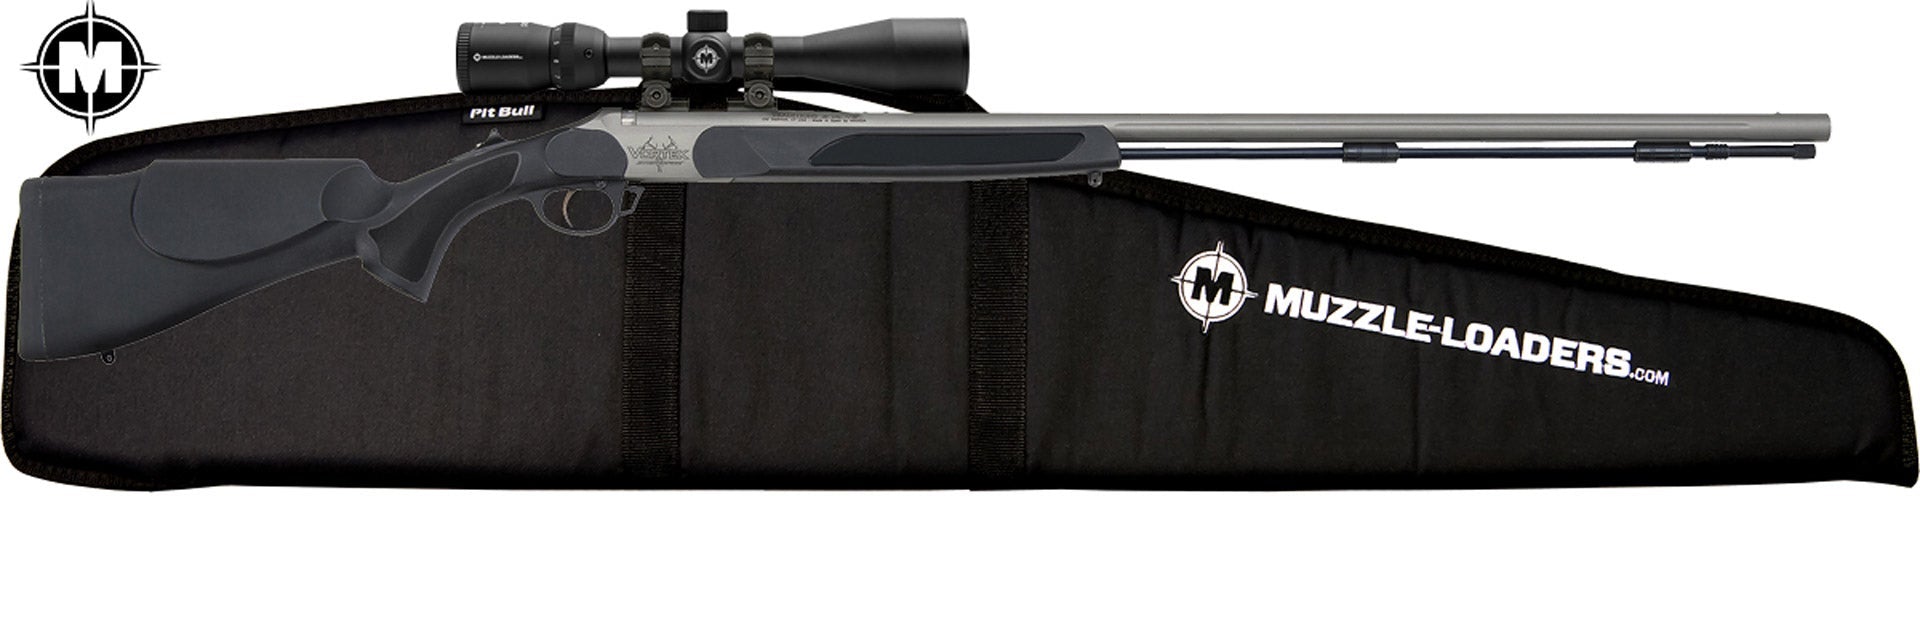  Traditions Performance Firearms Muzzleloader Deluxe